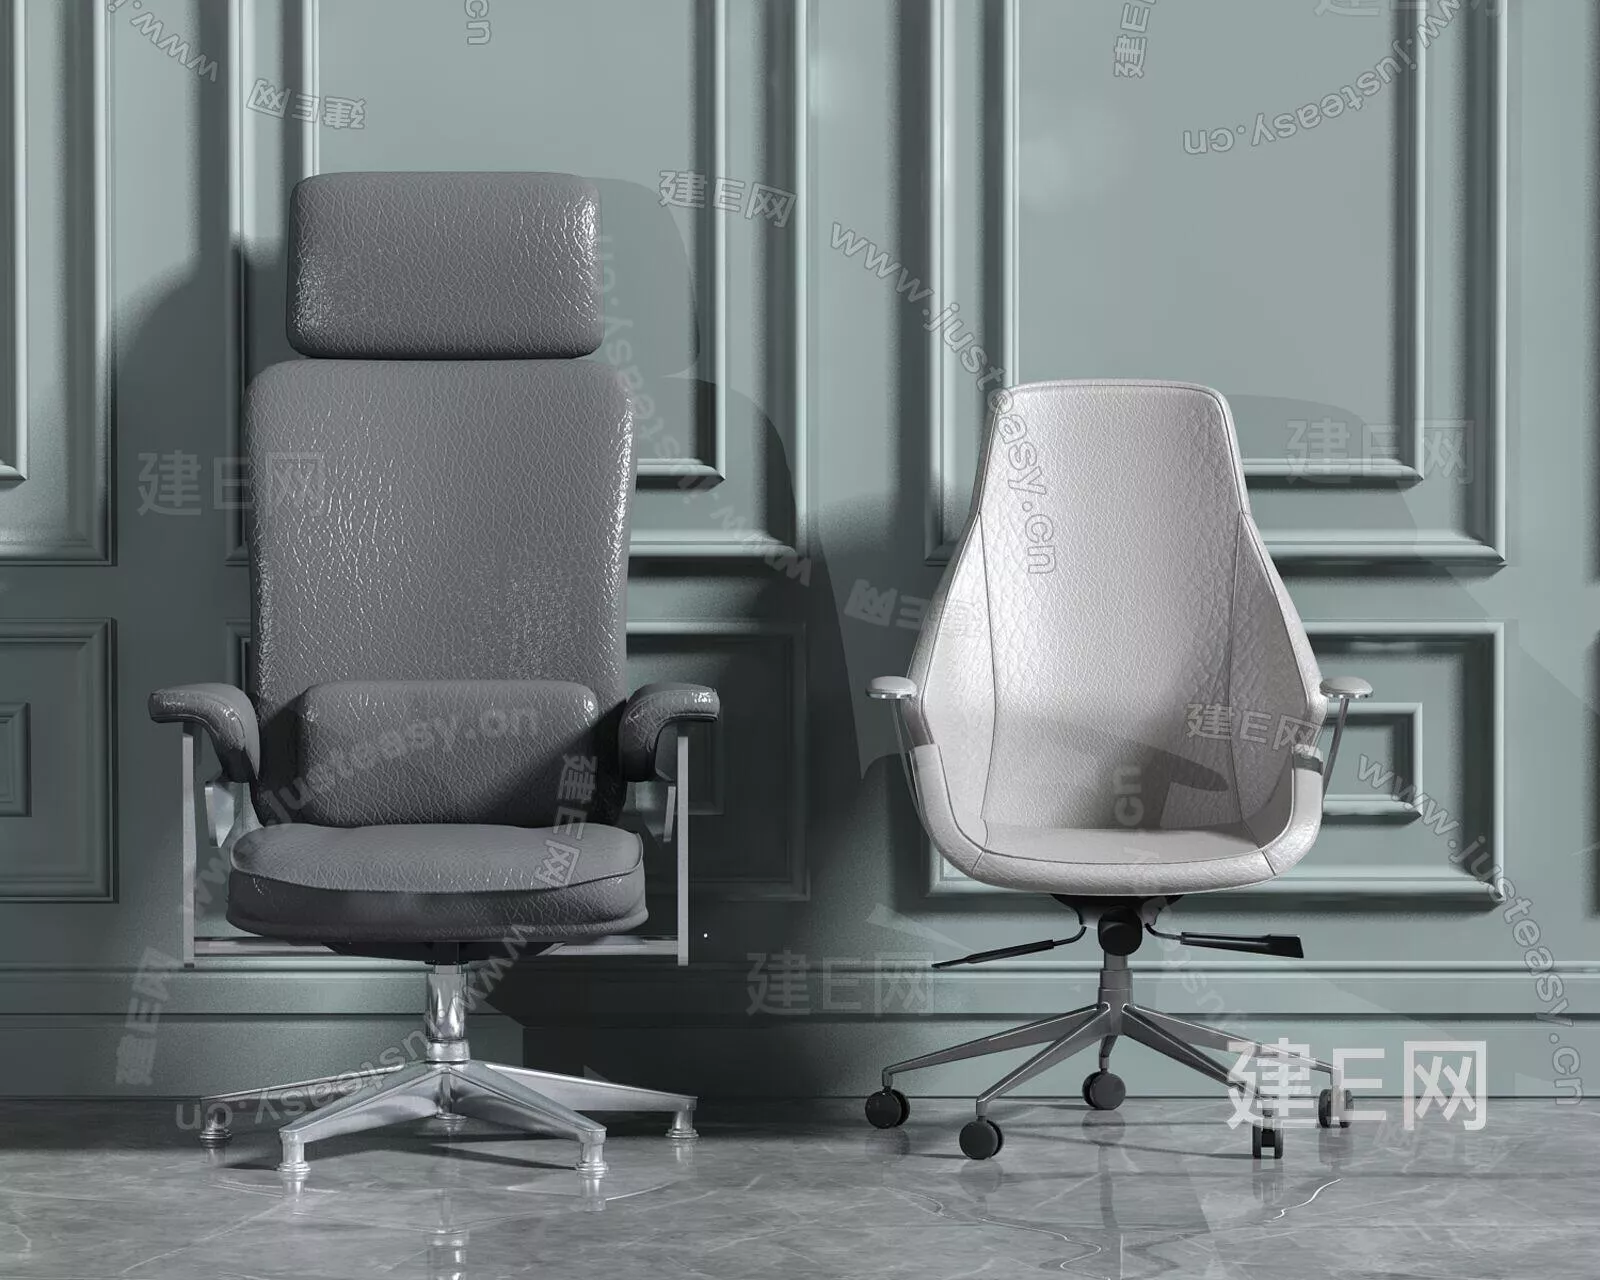 MODERN OFFICE CHAIR - SKETCHUP 3D MODEL - VRAY - 115819898